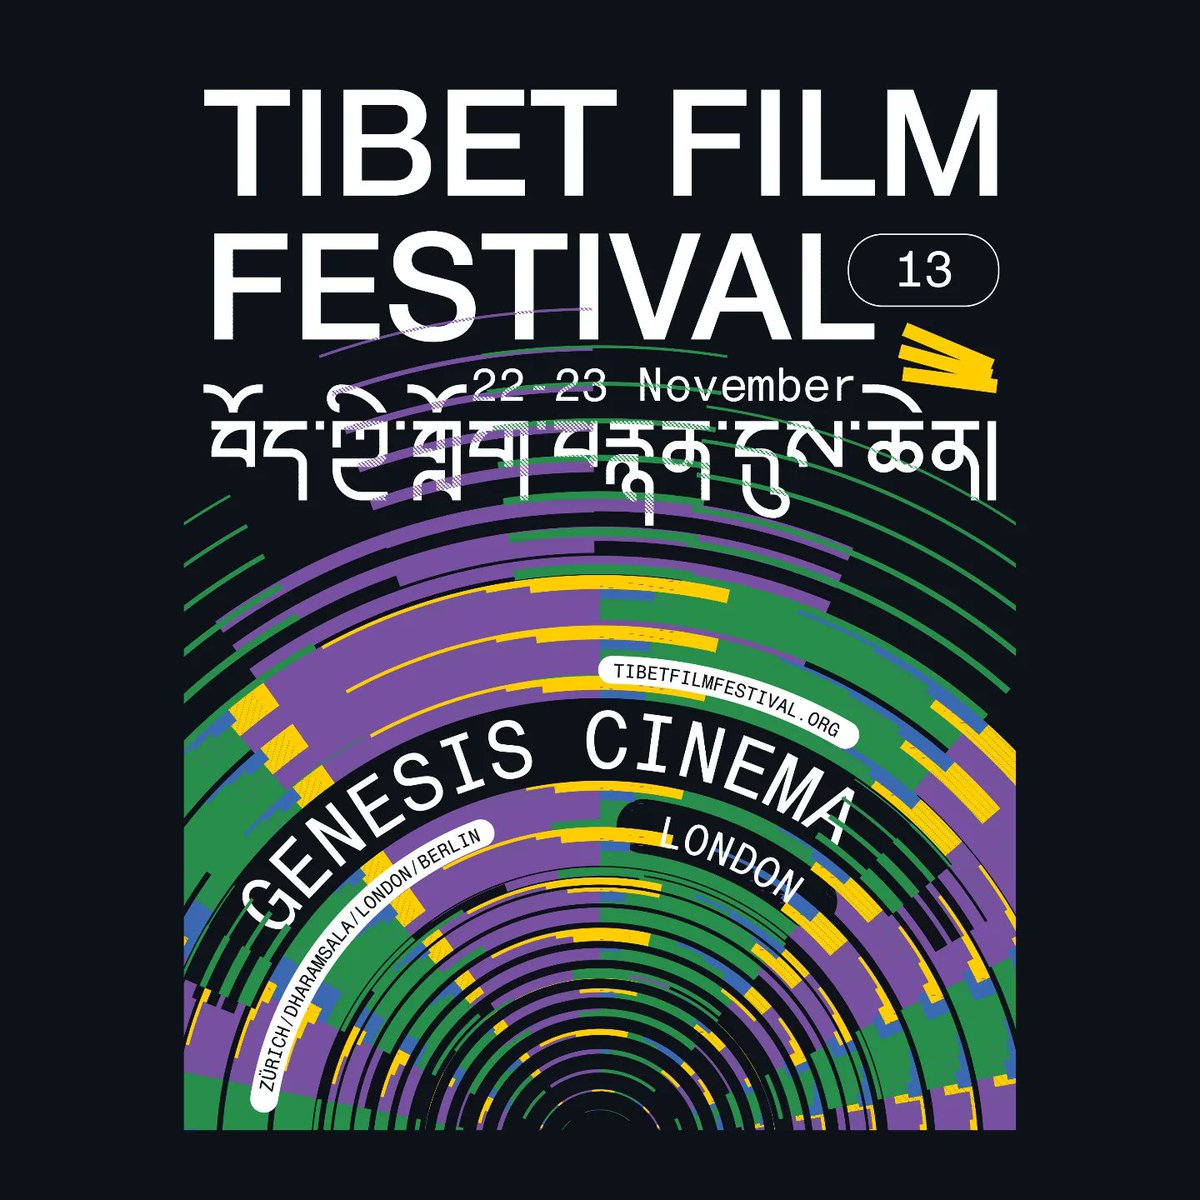 After successful festivals in Zurich, Berlin and Dharamsala, we're proud and excited to bring you the programme details for the #London edition of the #TibetFilmFestival taking place 22-23 November @GenesisCinema 🎬 Overview here: genesiscinema.co.uk/GenesisCinema.…